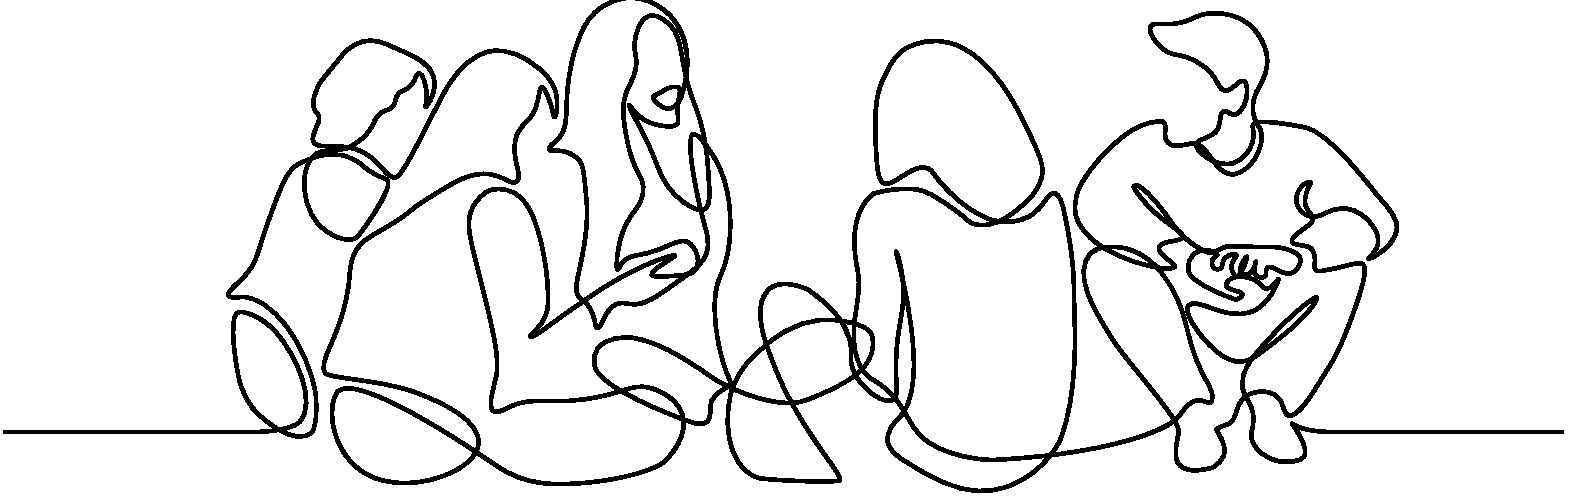 Line drawing of a group of people sitting and talking on the floor. It is one single connecting line.